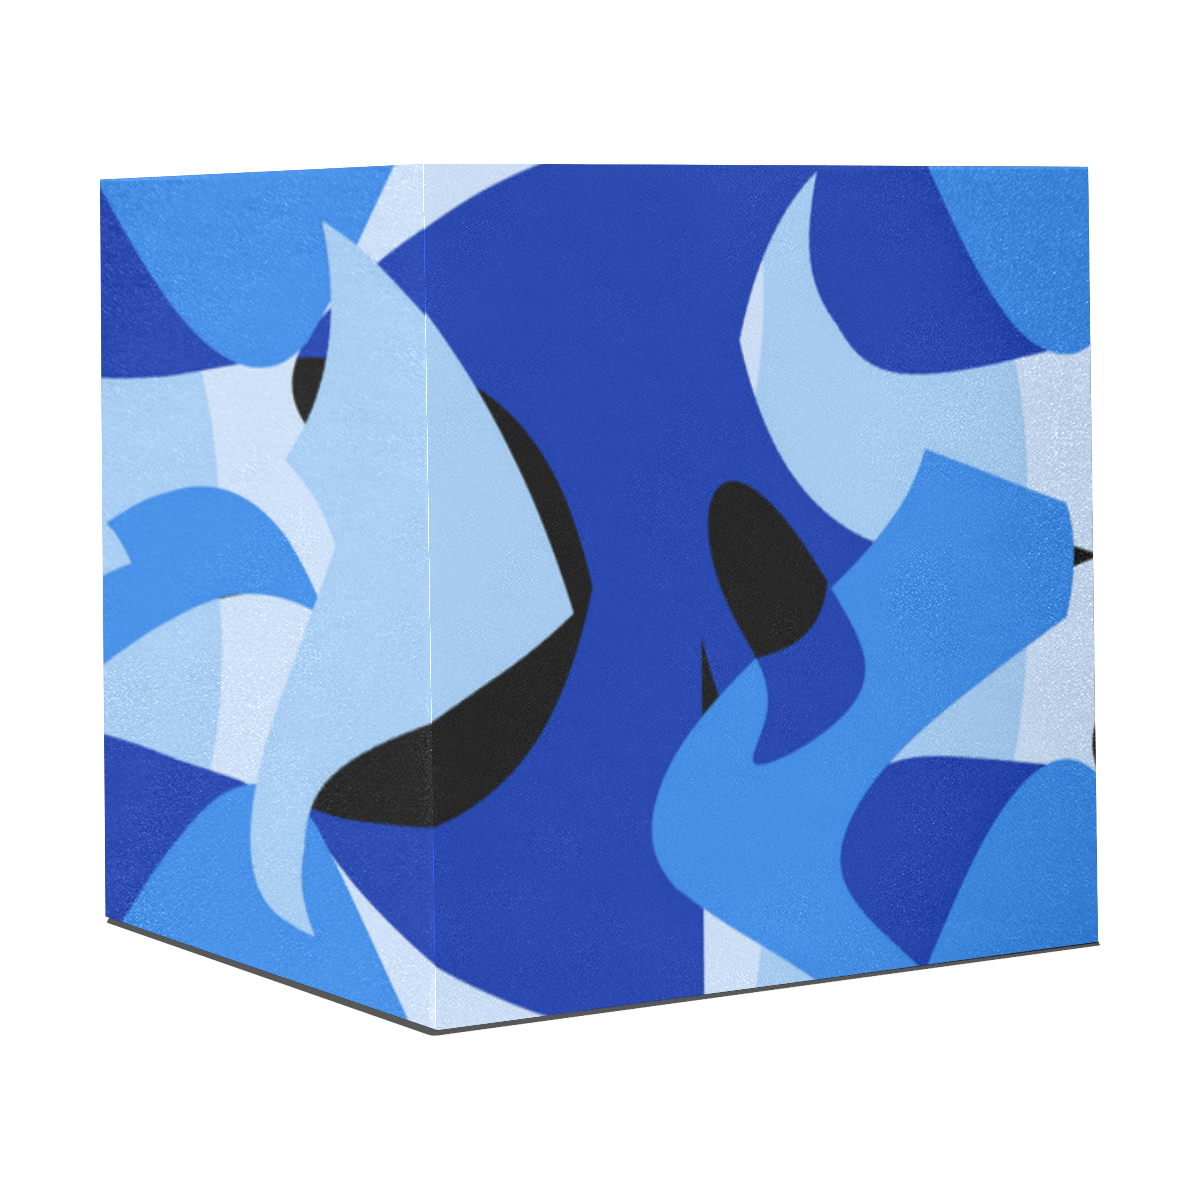 Camouflage Abstract Blue and Black Gift Wrapping Paper 58"x 23" (1 Roll)